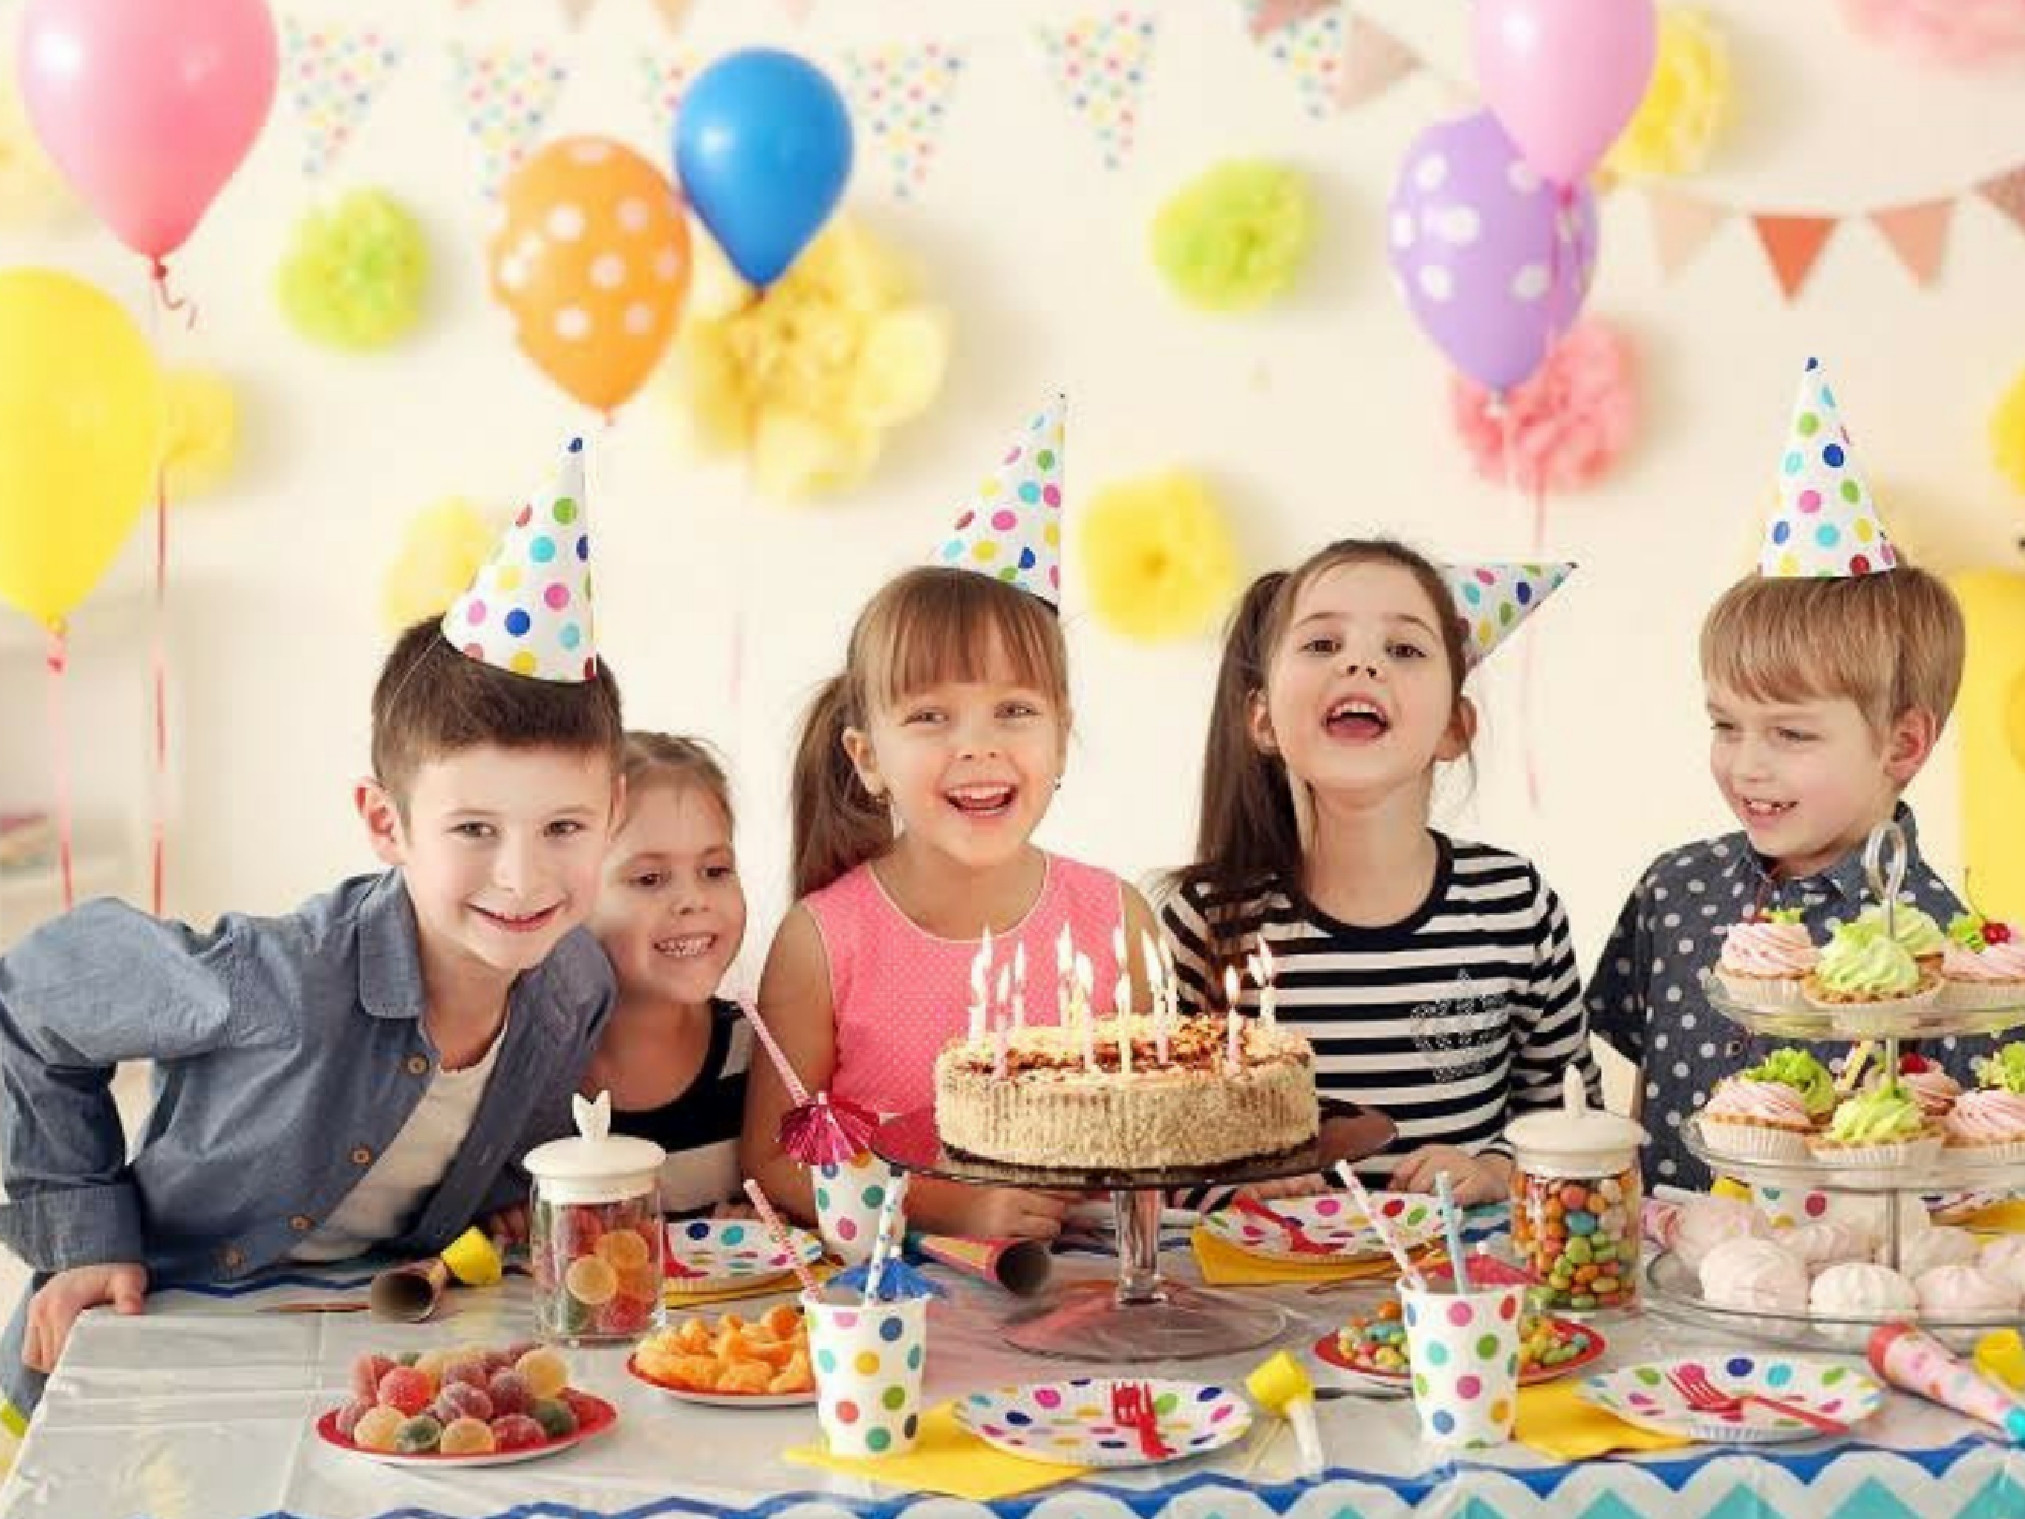 Birthday Party Activities For Kids
 How to Throw a Memorable Birthday Party for Your Kid